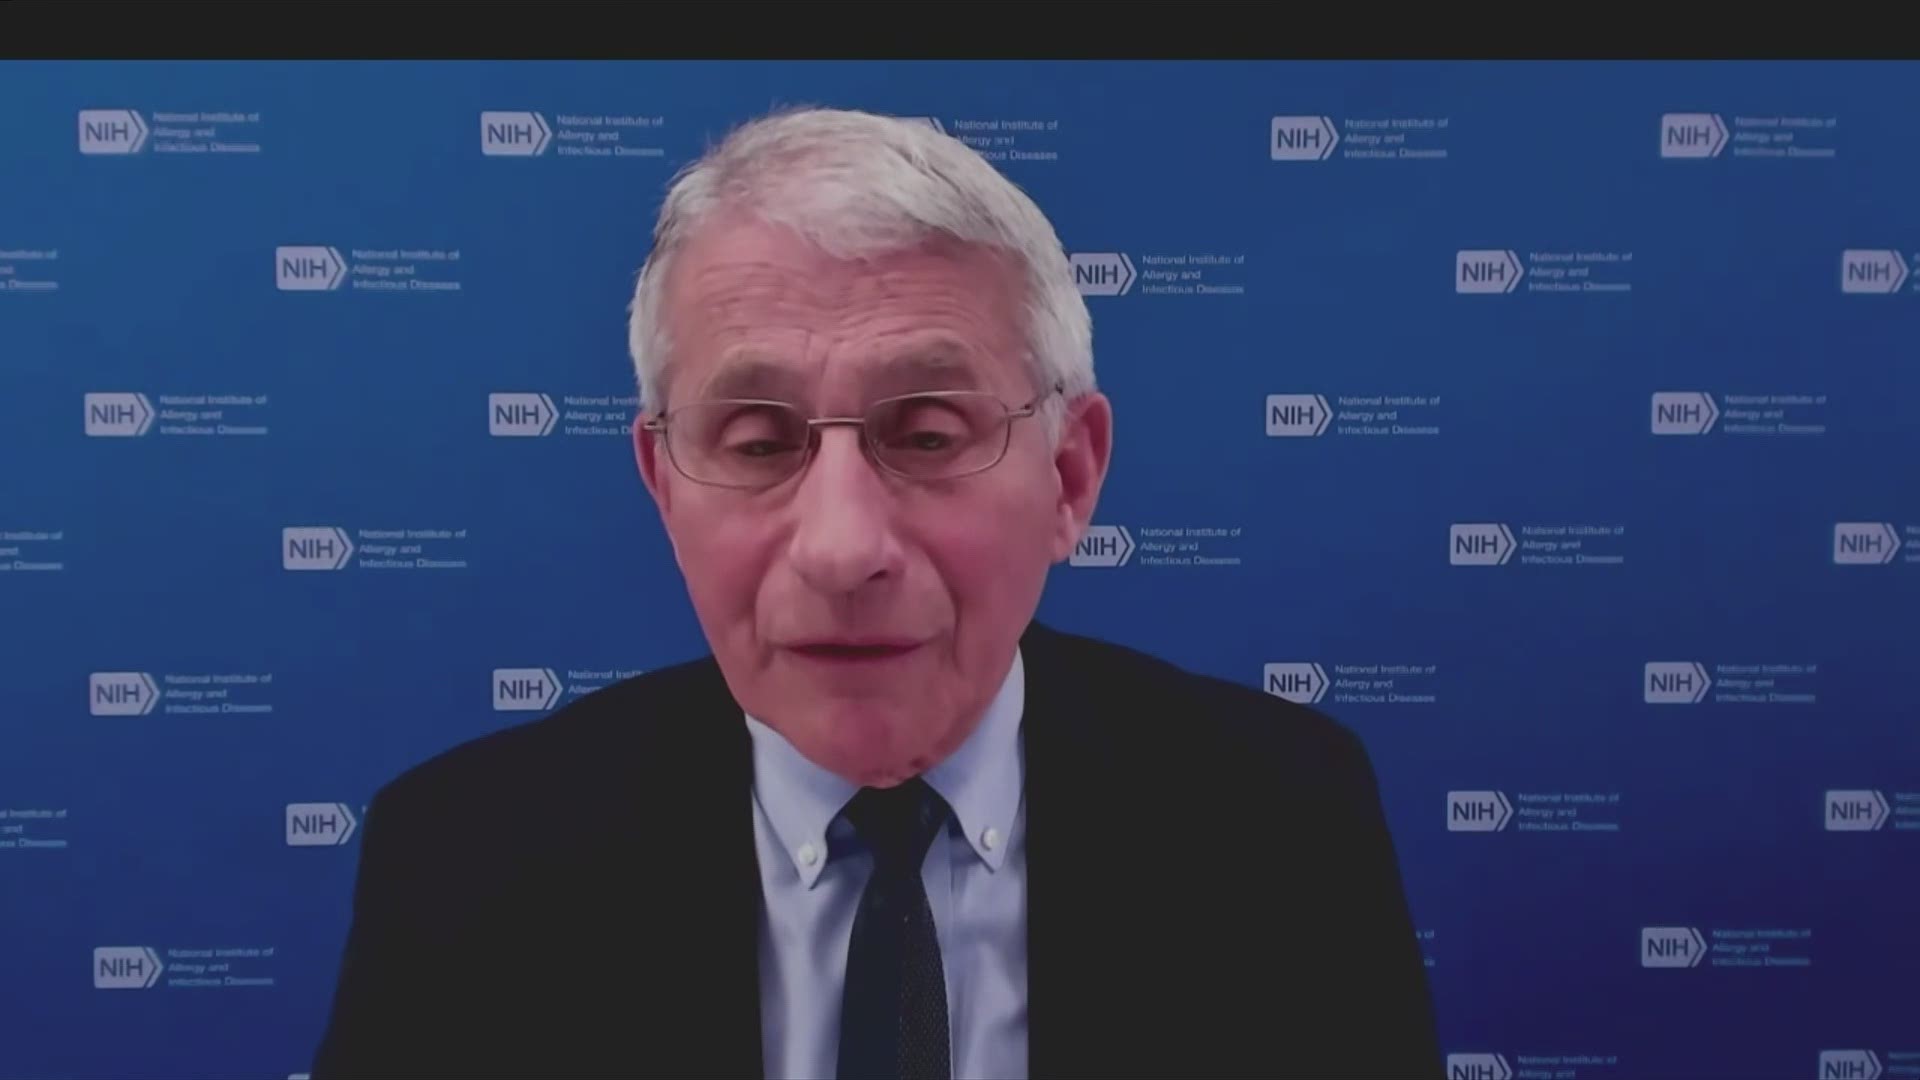 Dr. Anthony Fauci highlights the importance of COVID-19 vaccines against the new variants showing up around the world.